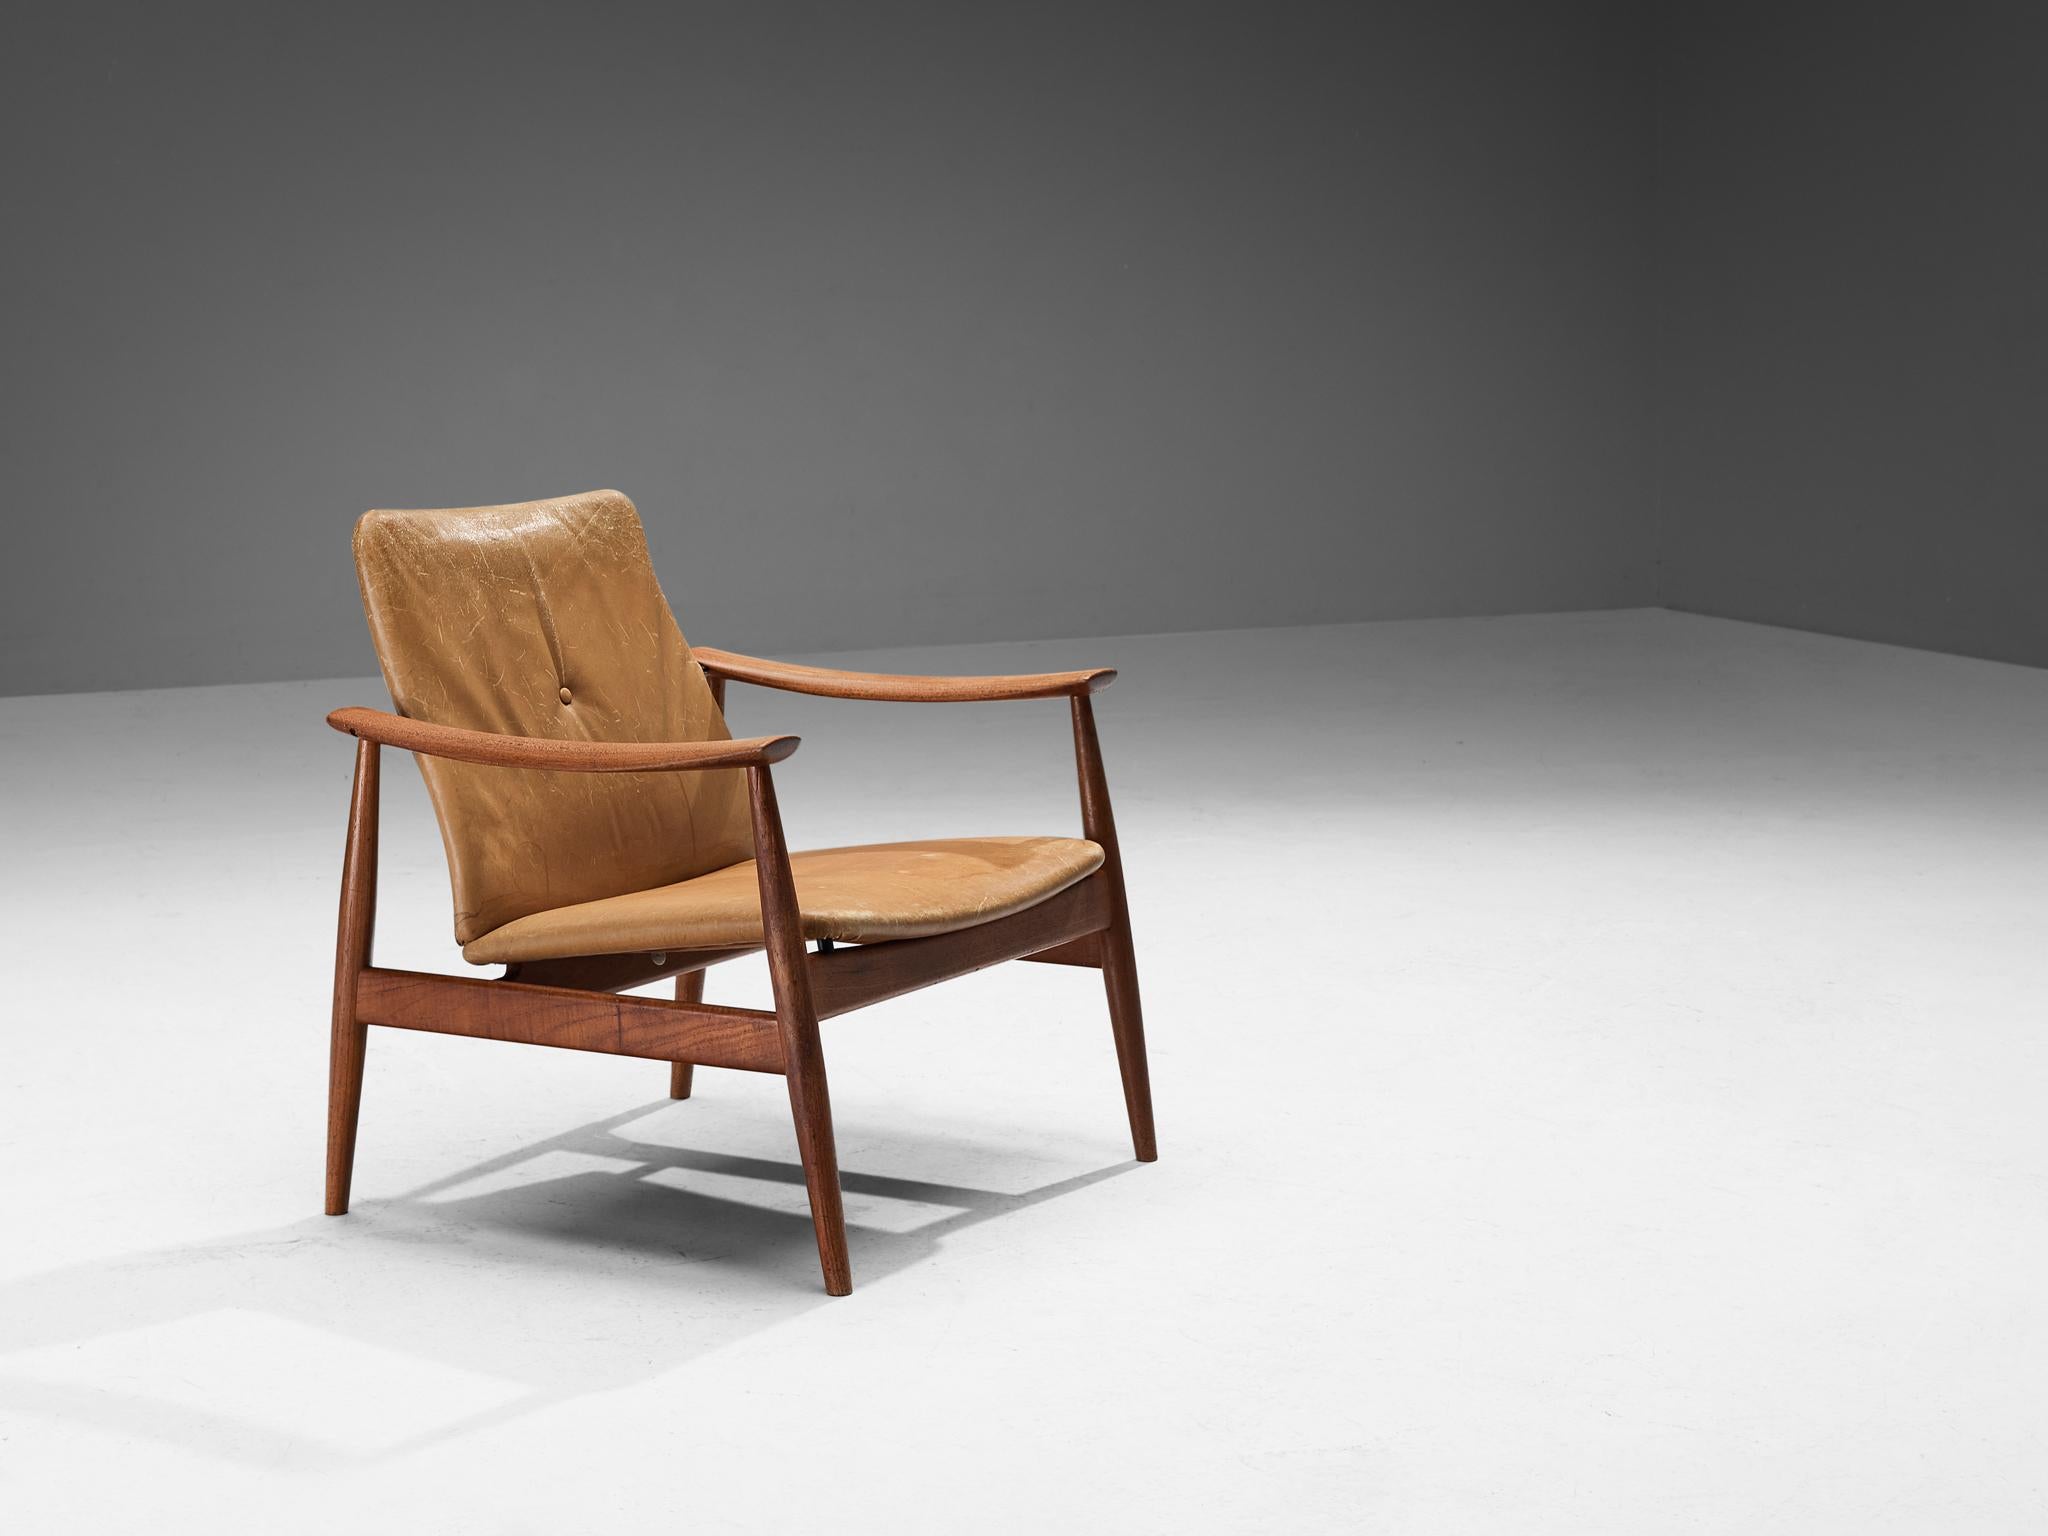 Finn Juhl for France & Søn, no. 138 lounge chair, teak, leather, Denmark, design ca. 1959

This easy chair is designed by Danish master designer Finn Juhl in 1959. Defined by a sleek organic frame in a beautiful teak with its tapered legs guarantees